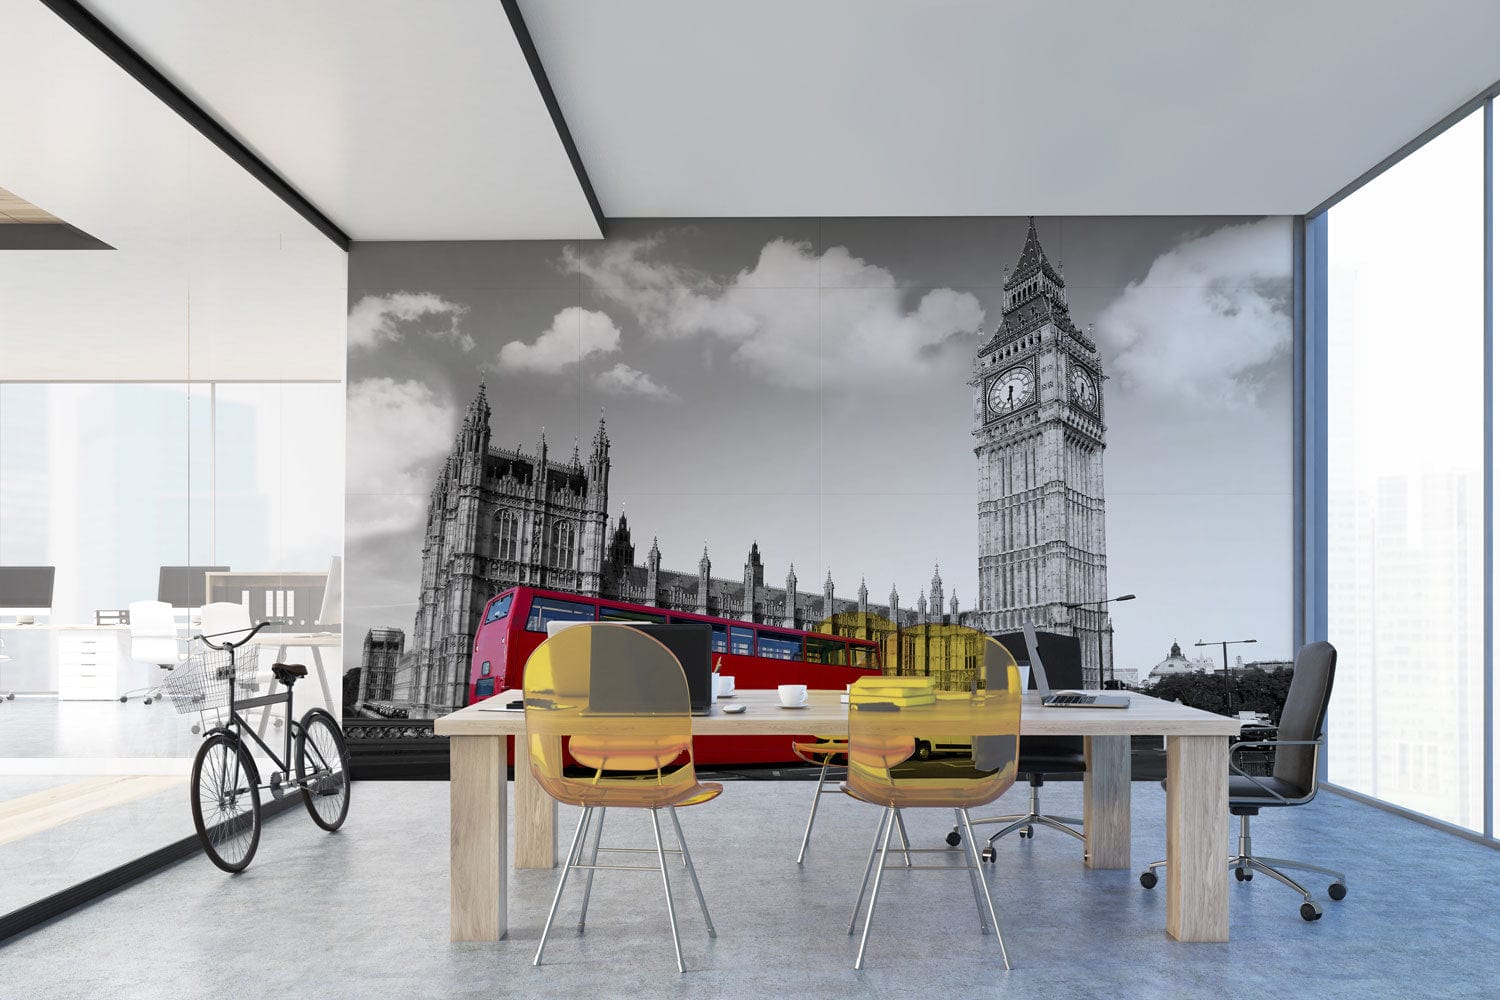 Wallpaper mural of a red London bus for use in interior design of an office